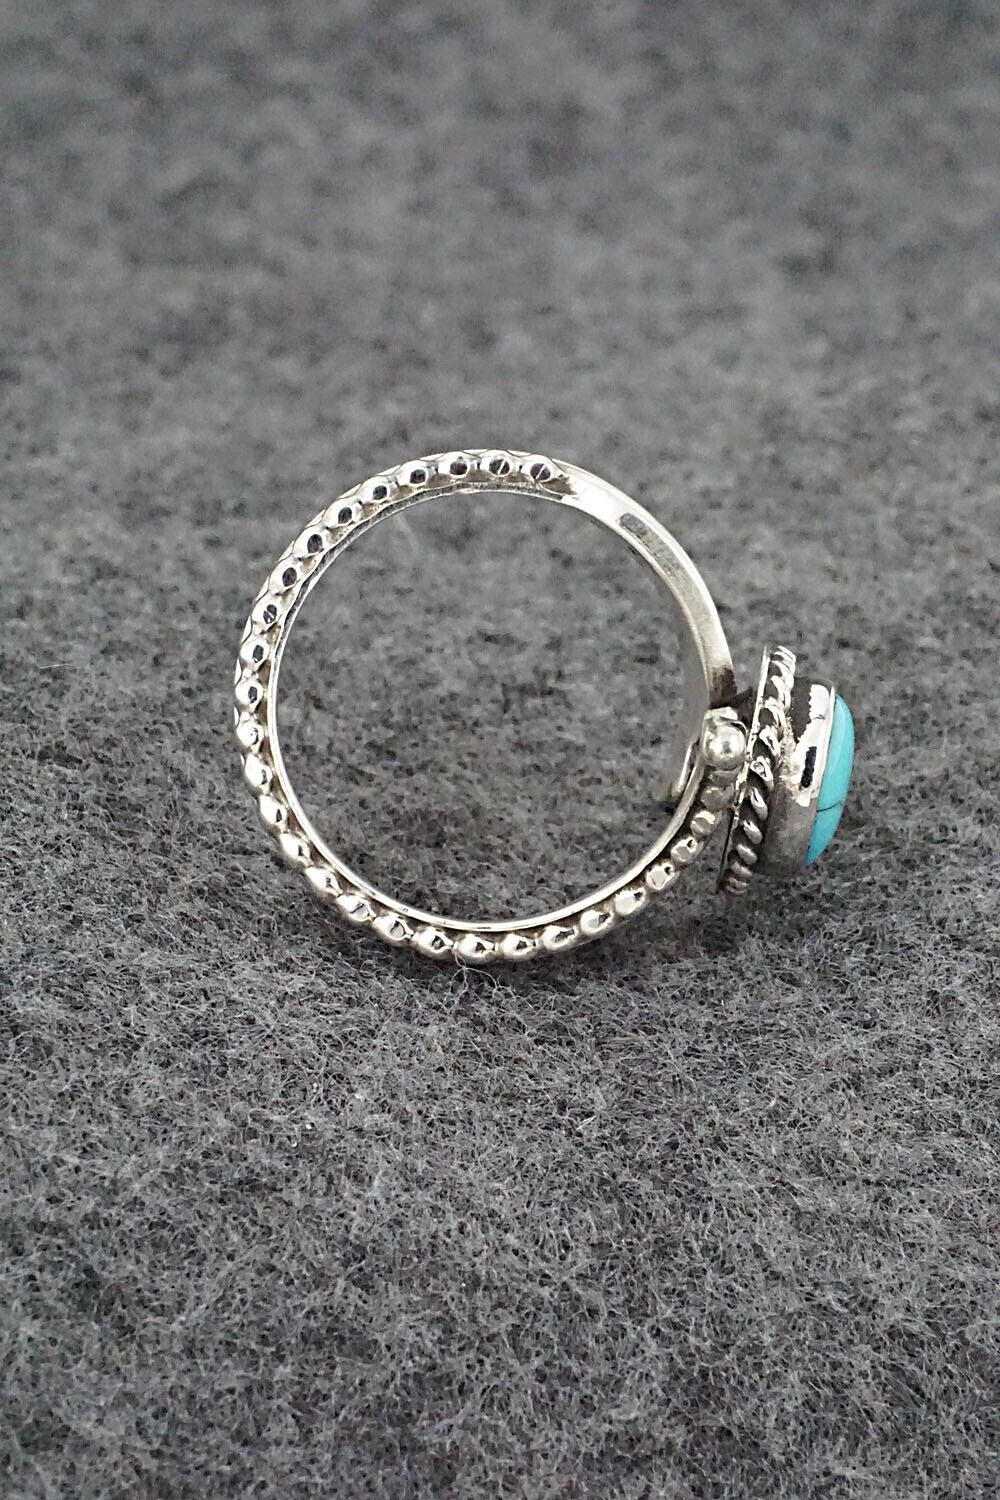 Turquoise & Sterling Silver Ring - Thomas Yazzie - Size 7.5